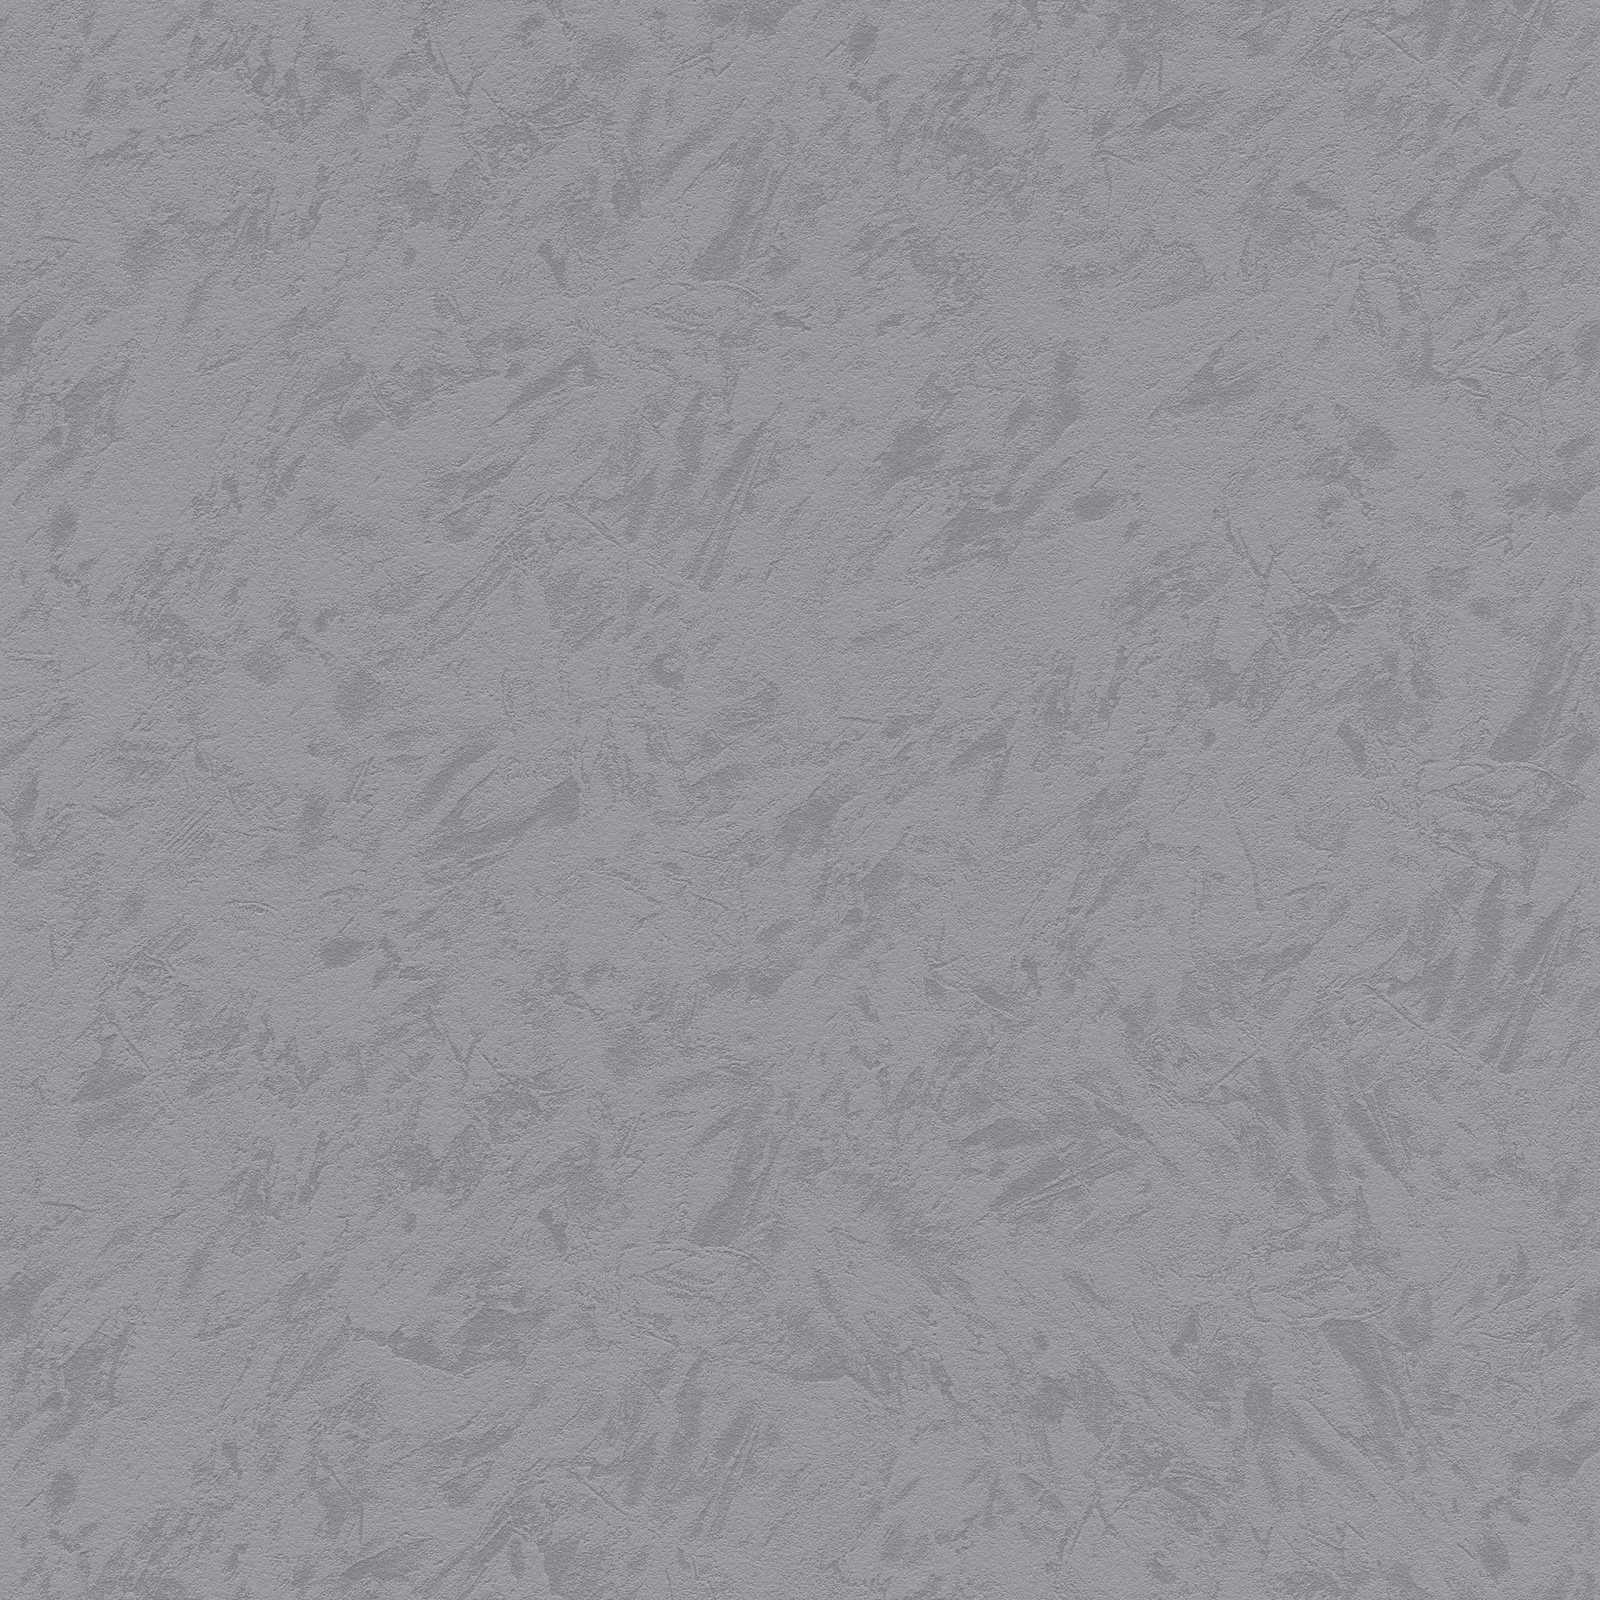 Anthracite grey pattern wallpaper with plaster look - grey
